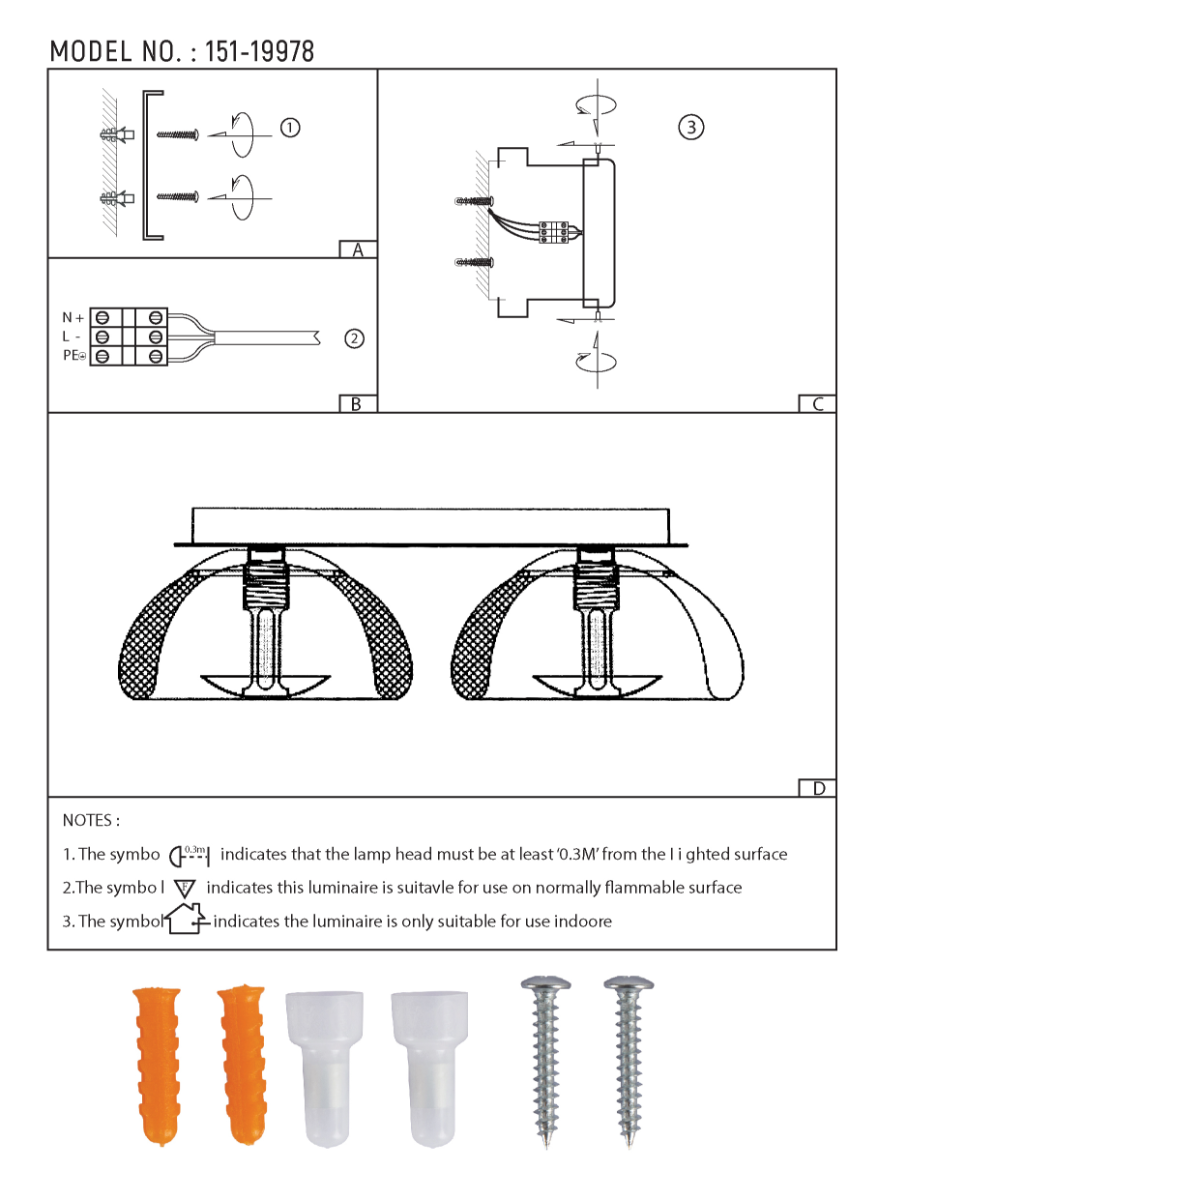 Technical specs of Industrial Chic Halo Wall Sconce Light 151-19978